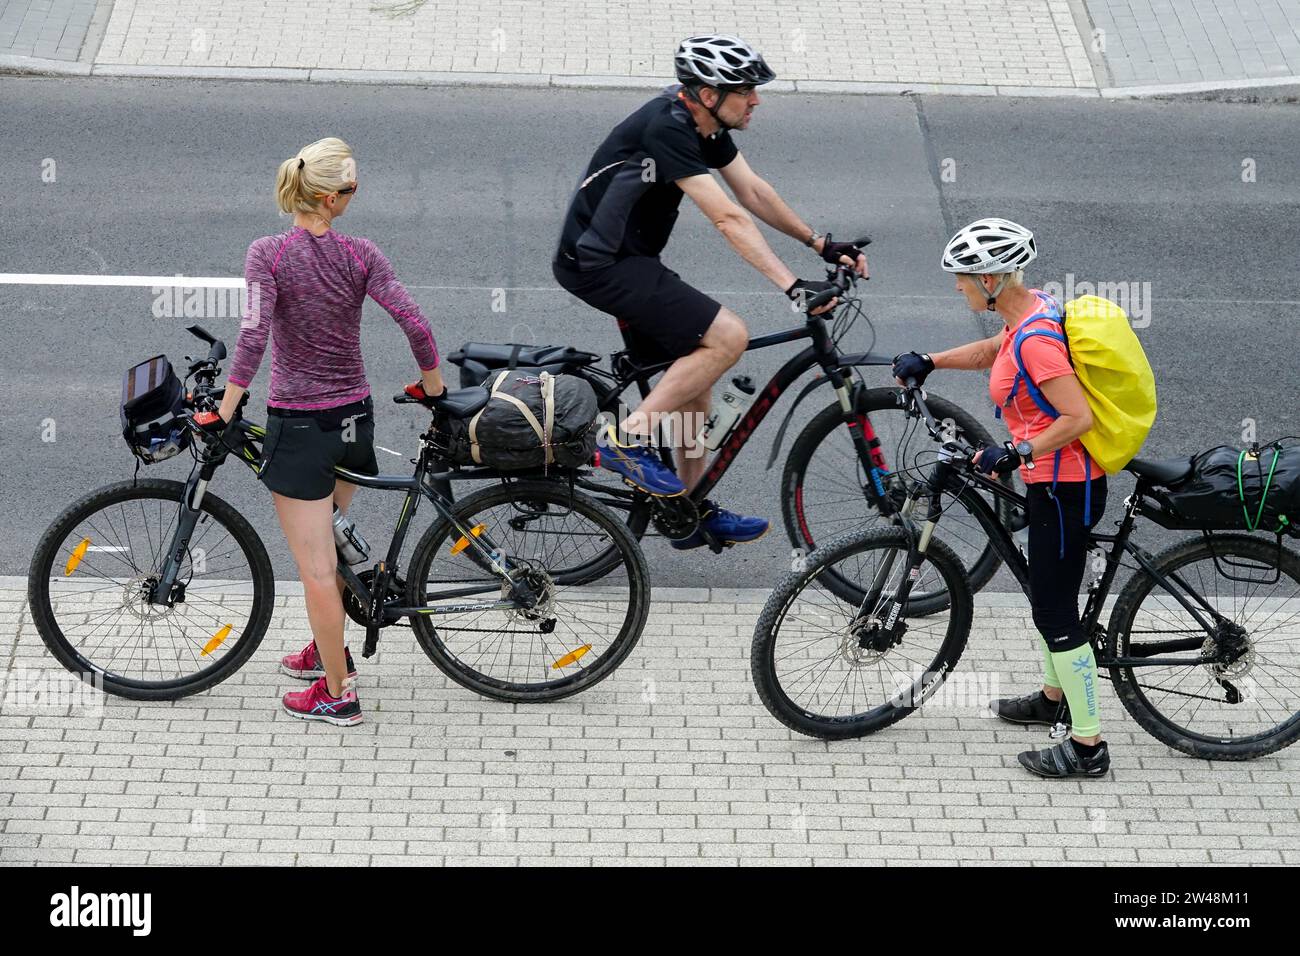 Two women on bicycles meet a passing man on a bicycle Stock Photo